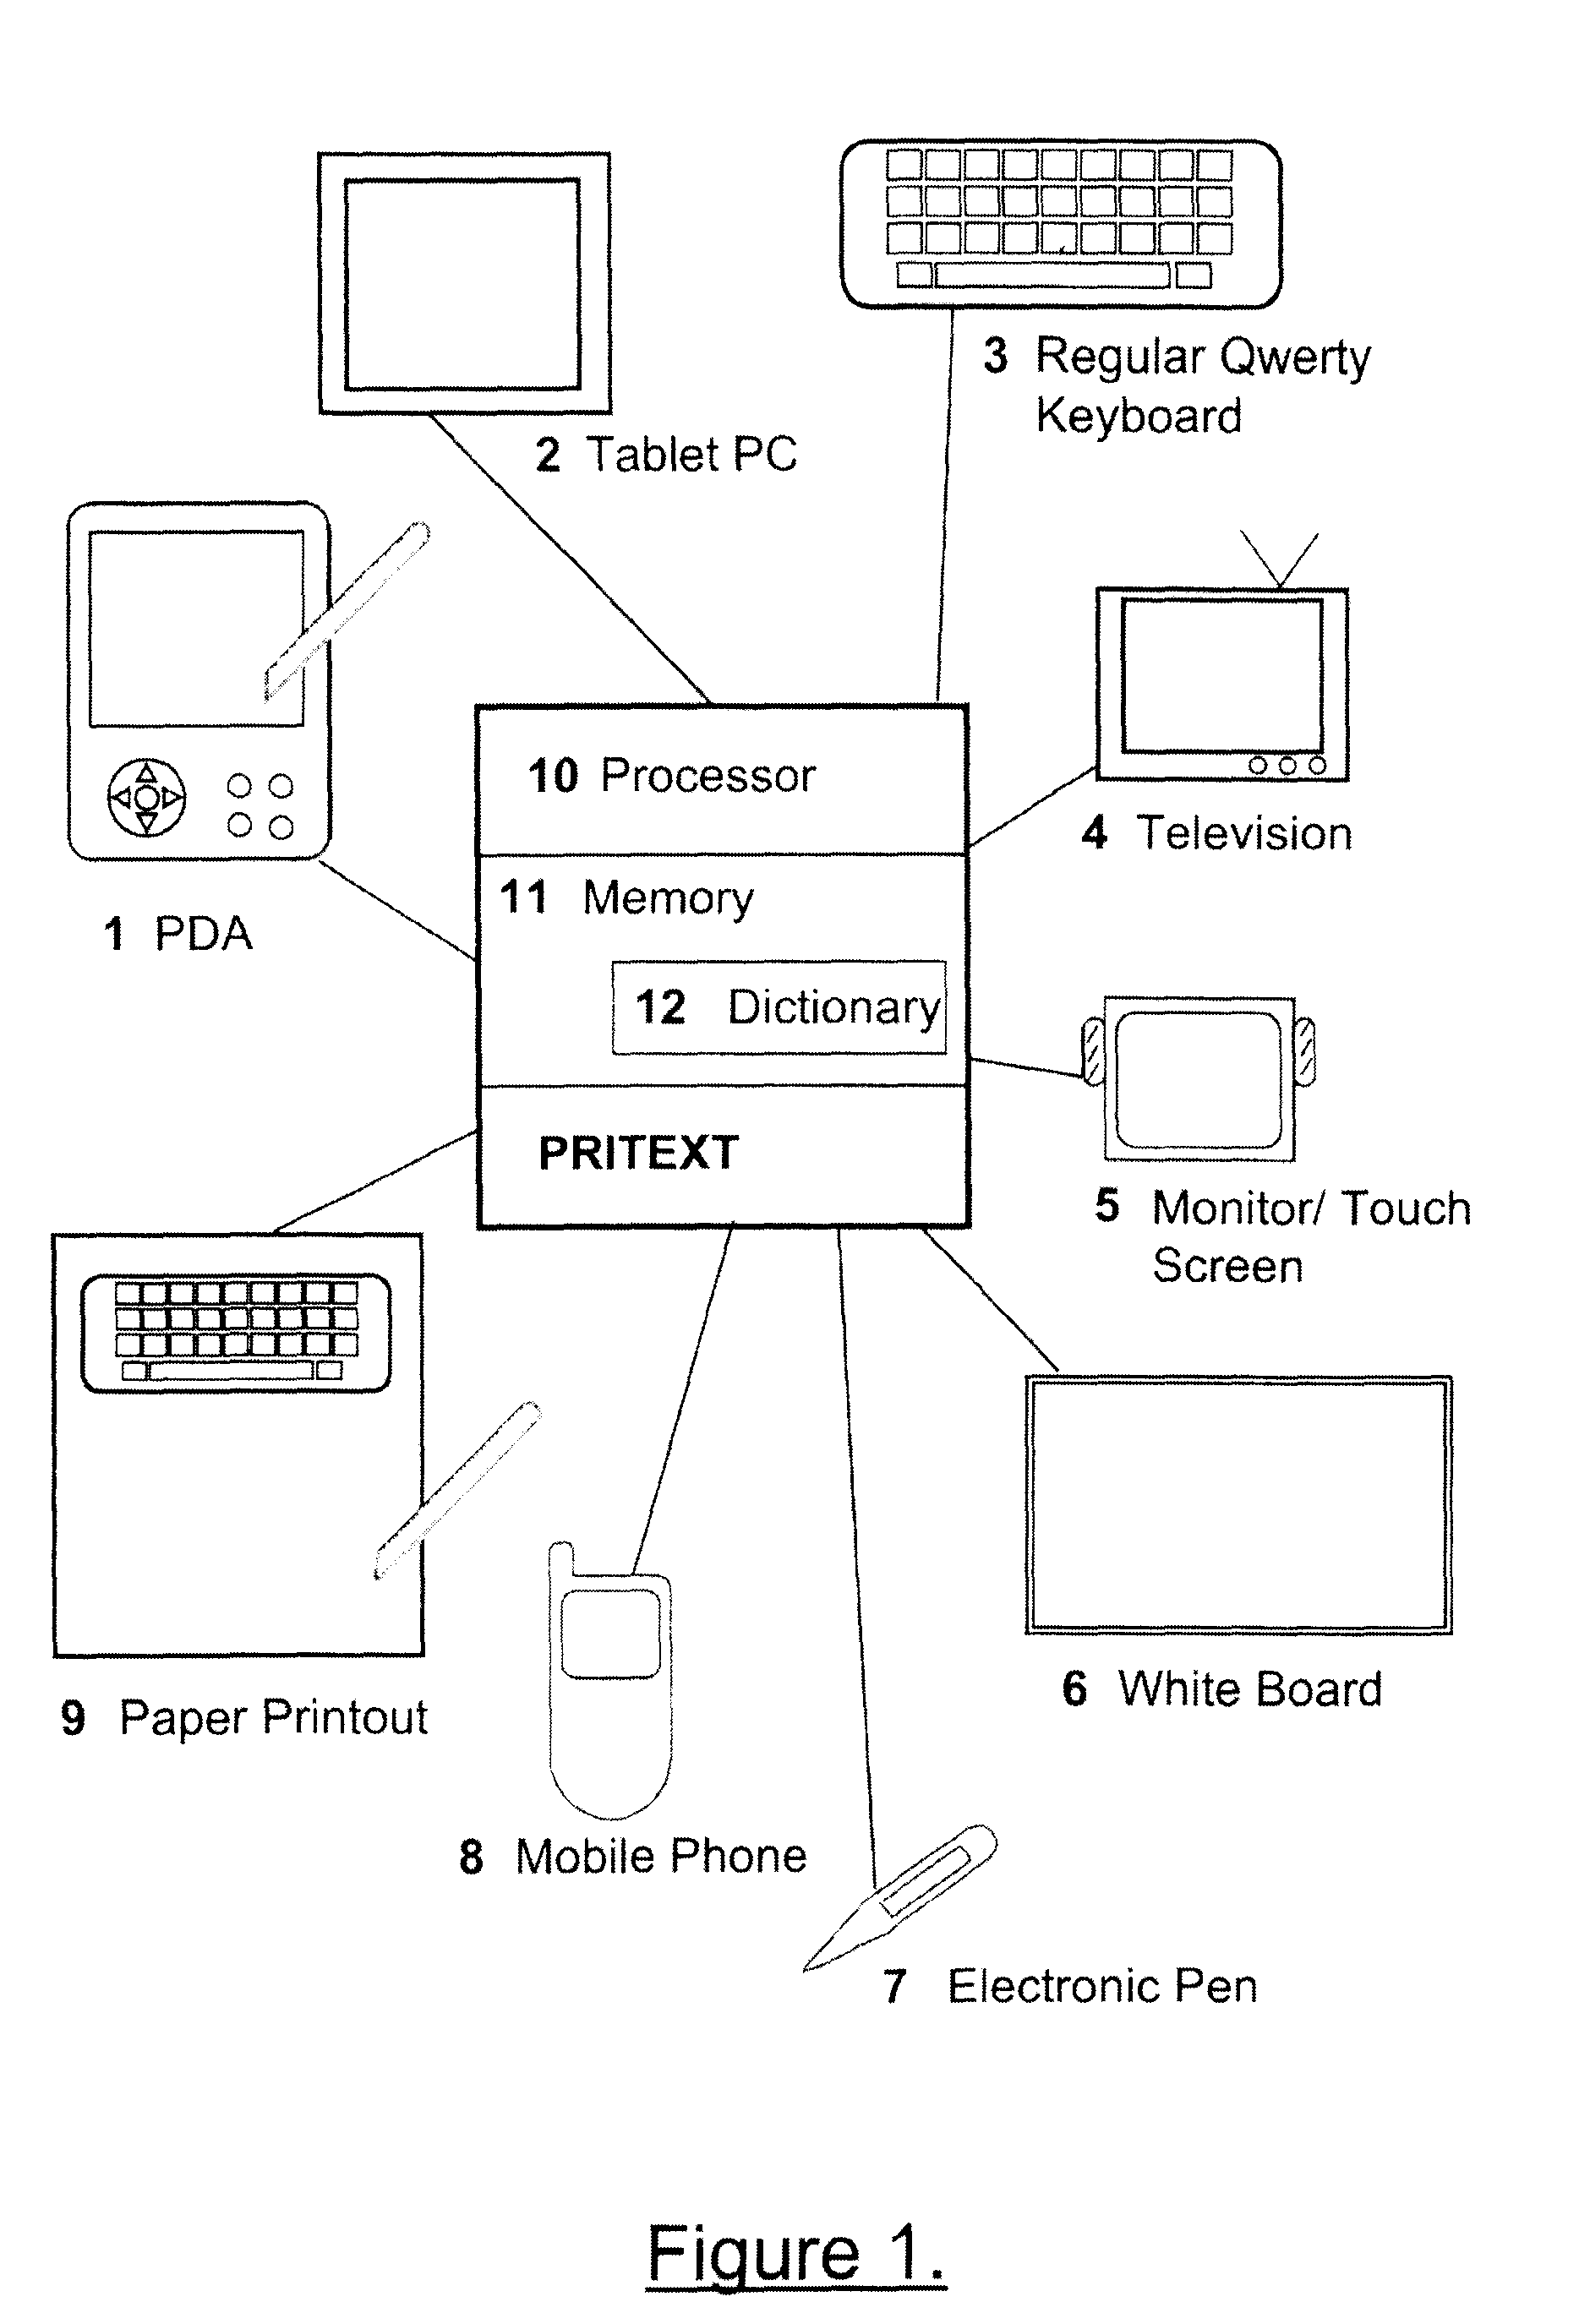 Data Entry System and Method of Entering Data